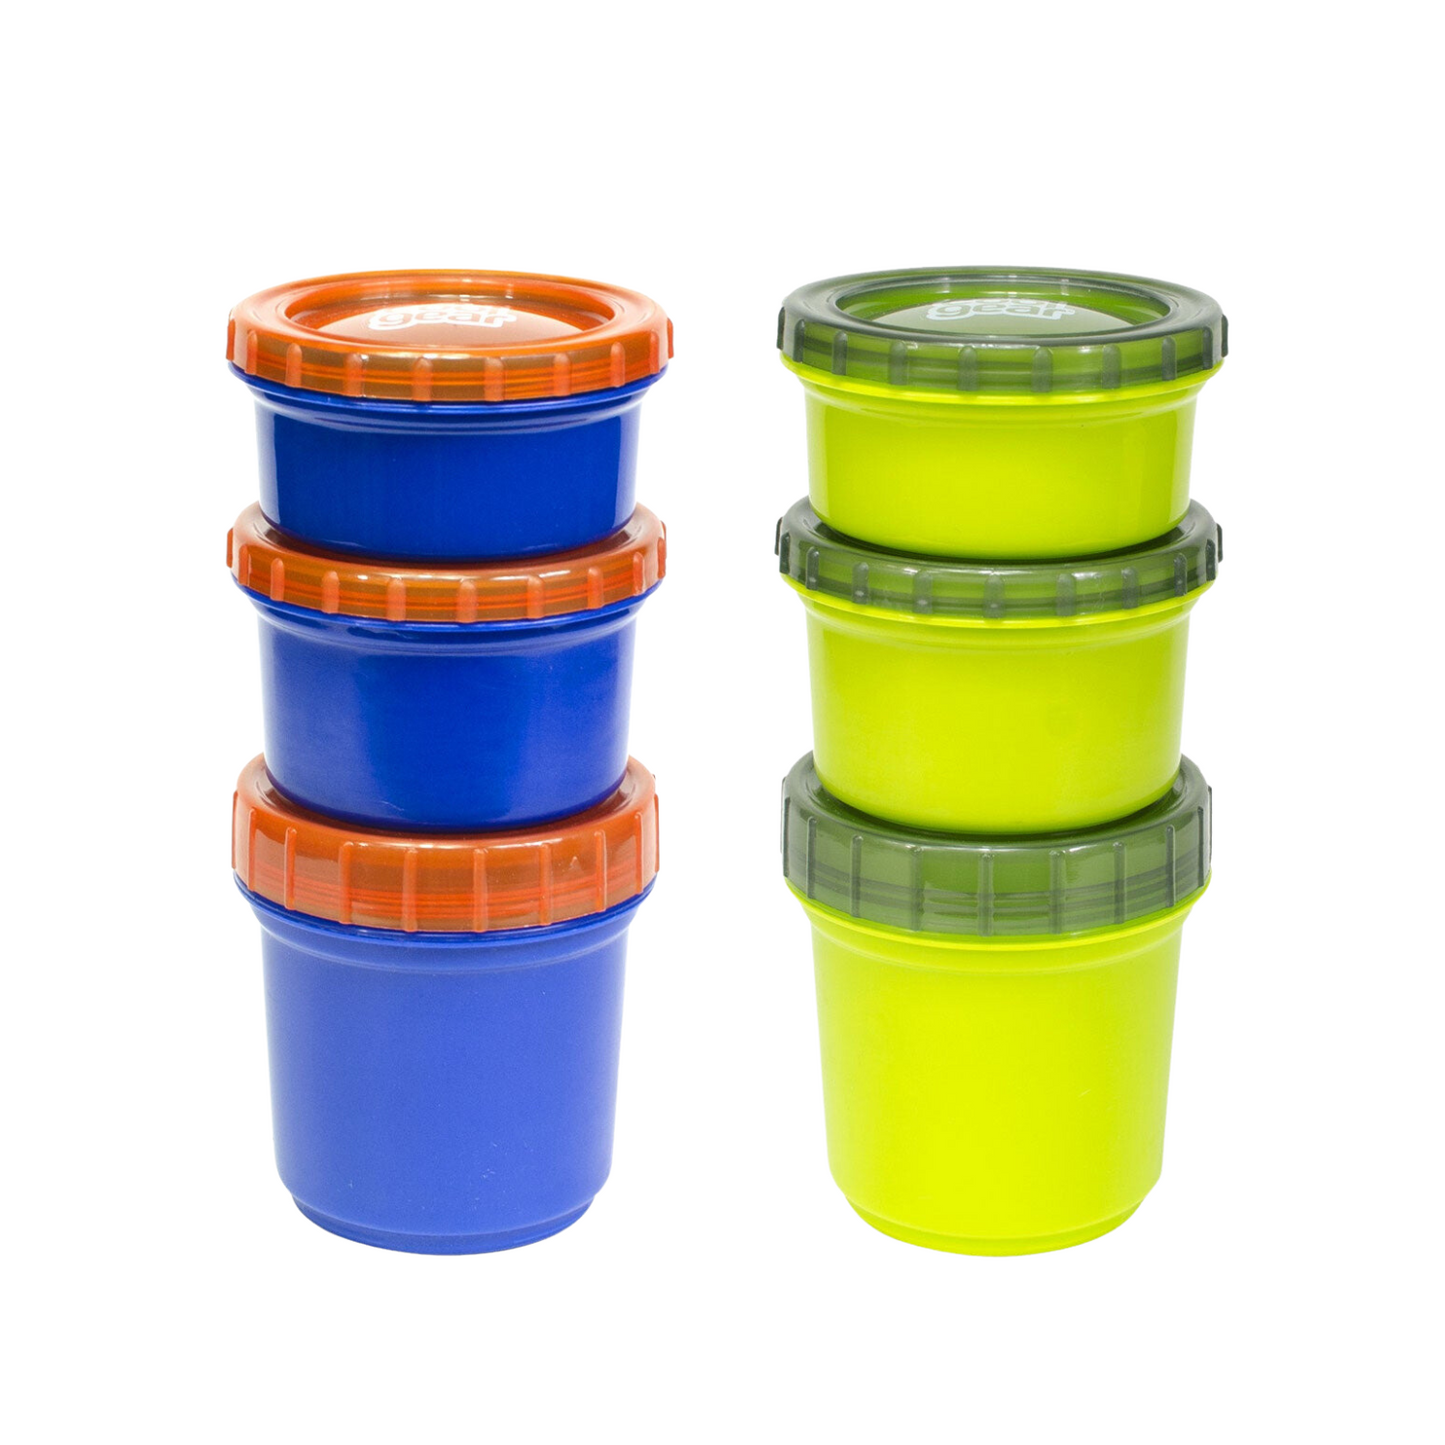 Re-Play Made in USA Snack Stack - 2 Pack Stackable Snack Containers for  Kids with Clear Travel Lid and Handle - Microwave, Dishwasher and Freezer  Safe